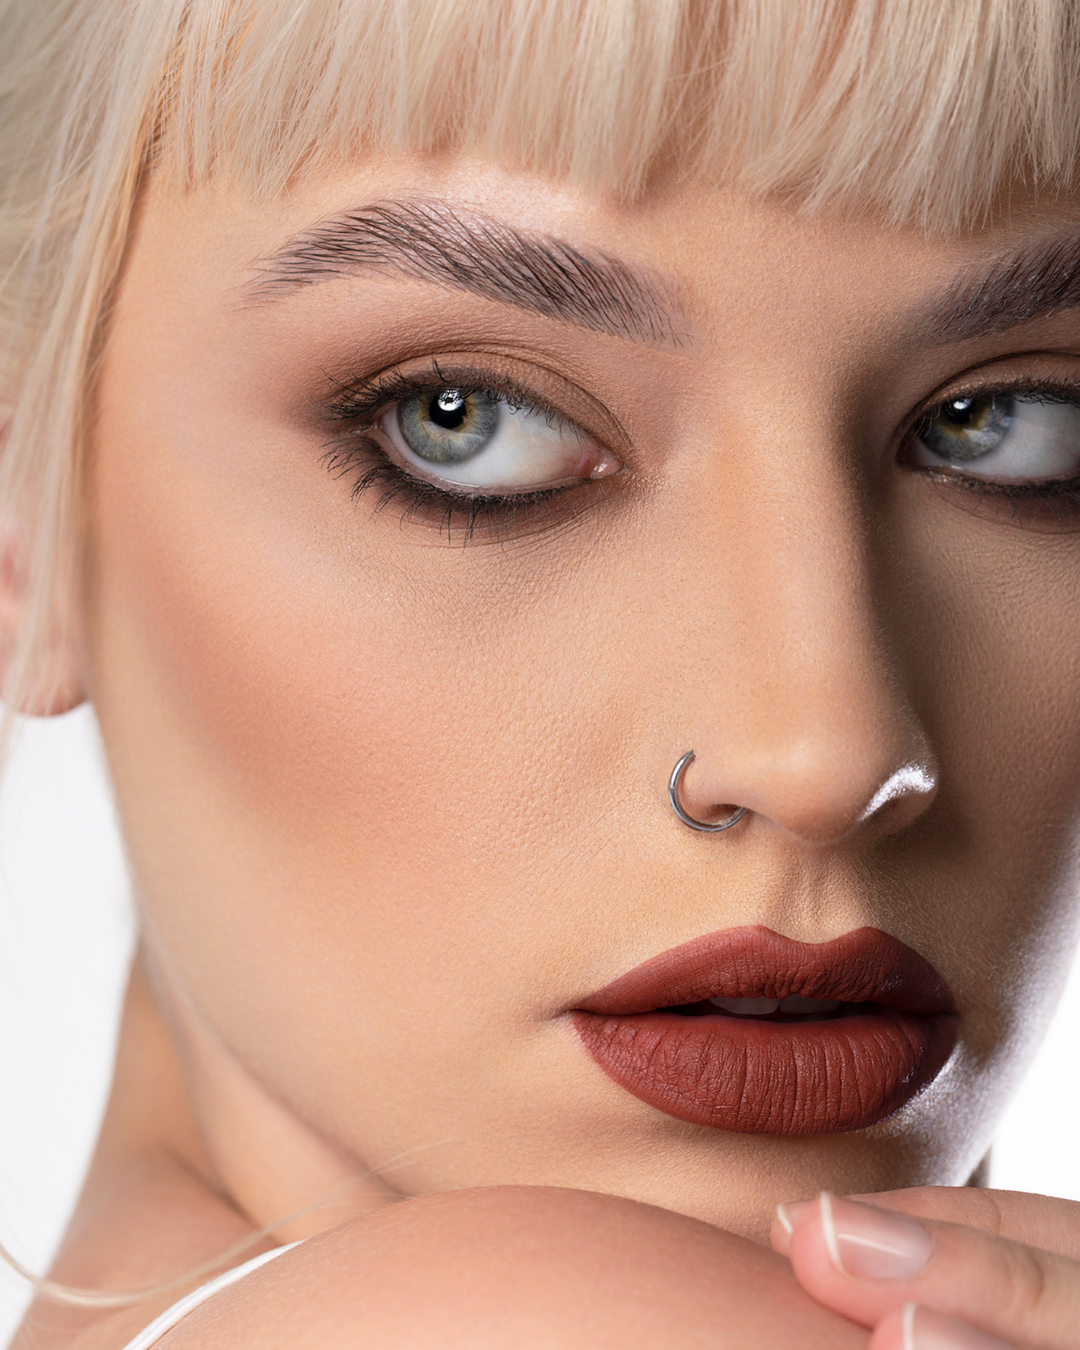 A model wearing the Peaking Velvet Mousse Lipstick which is like a darker more mysterious red